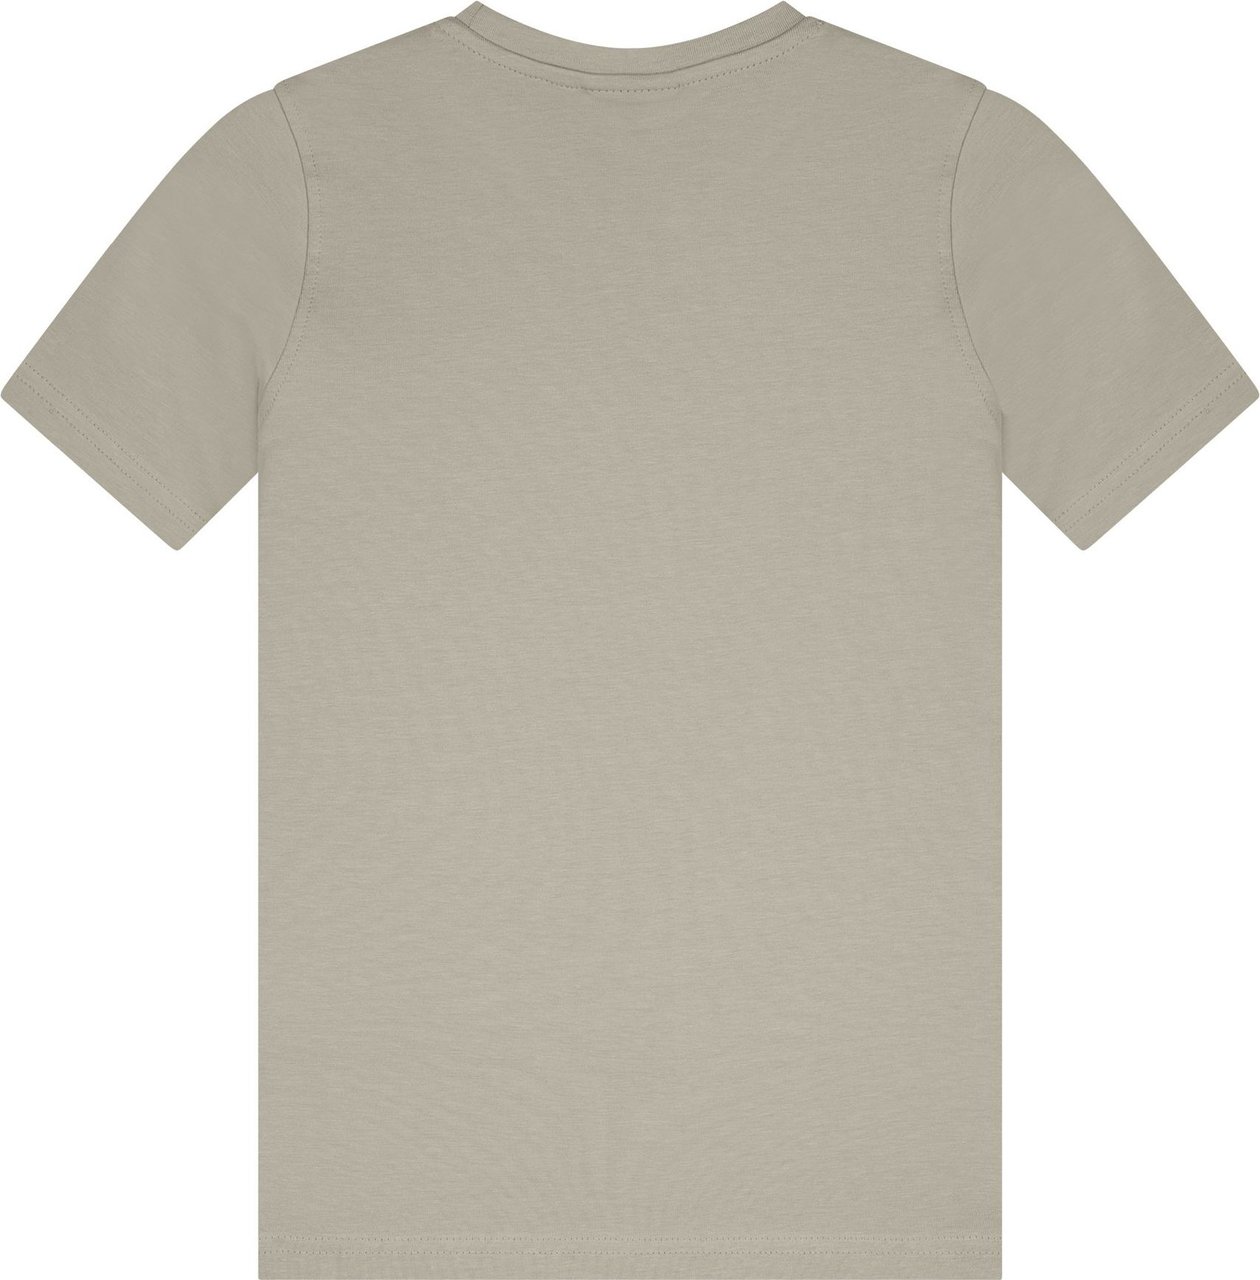 Malelions Essentials T-Shirt - Taupe/Beige Taupe